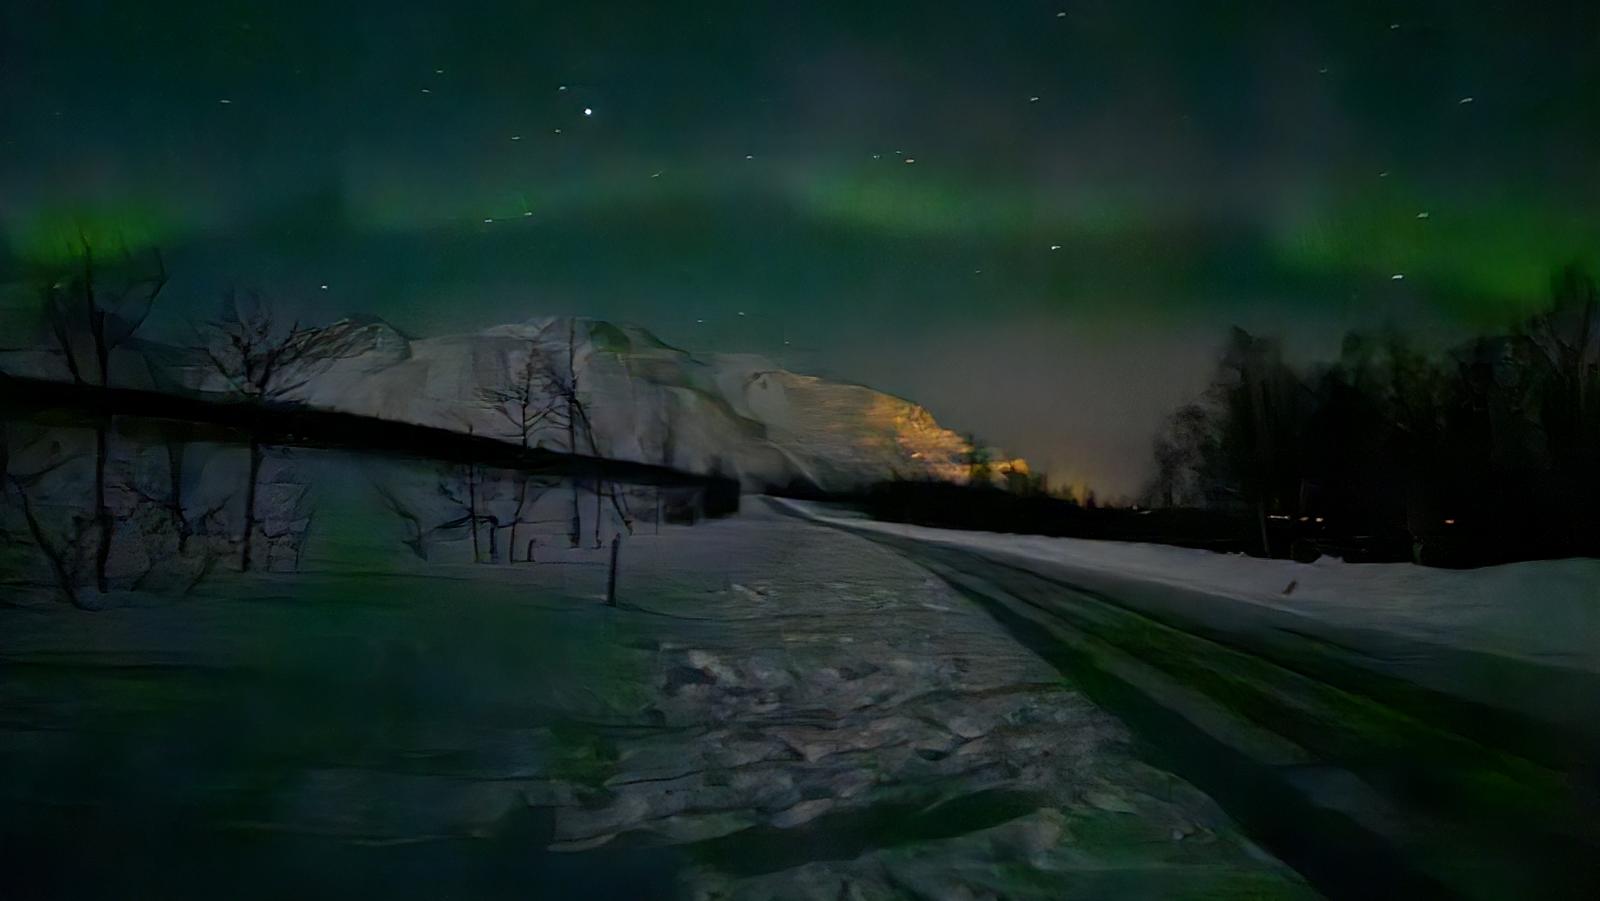 Snowy mountains and the Northern Lights